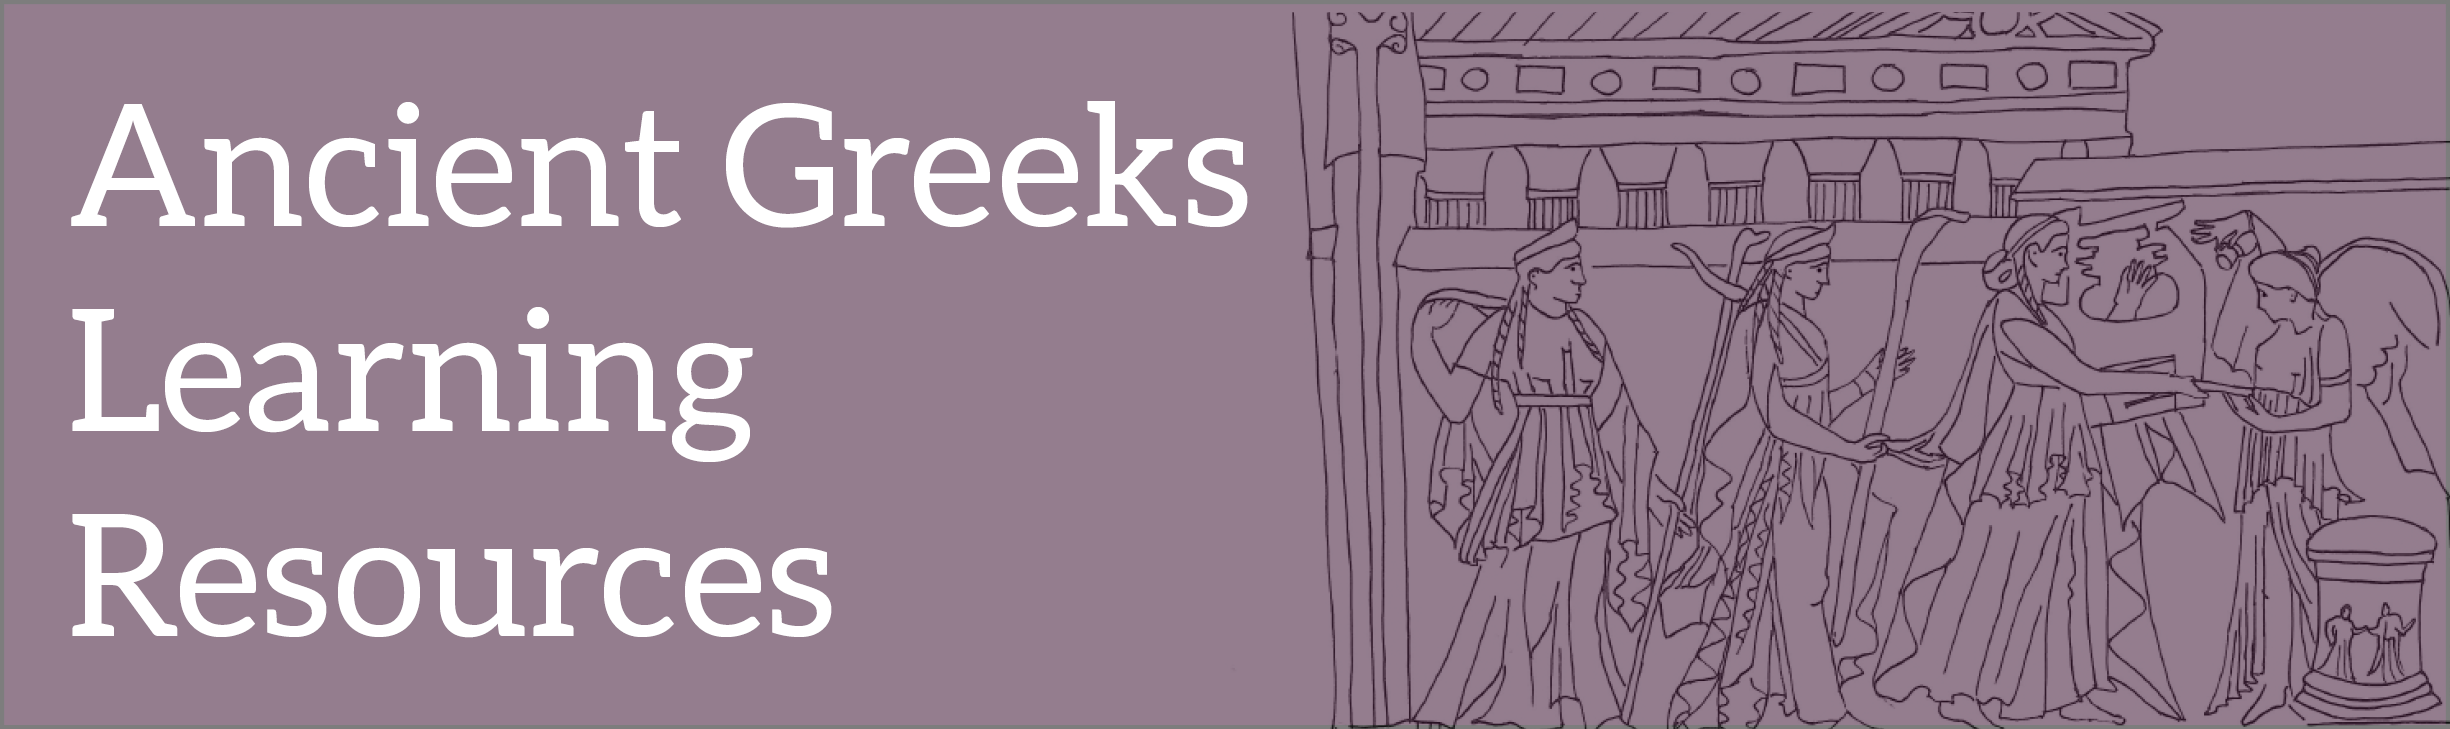 Ancient Greeks learning resources teaser 